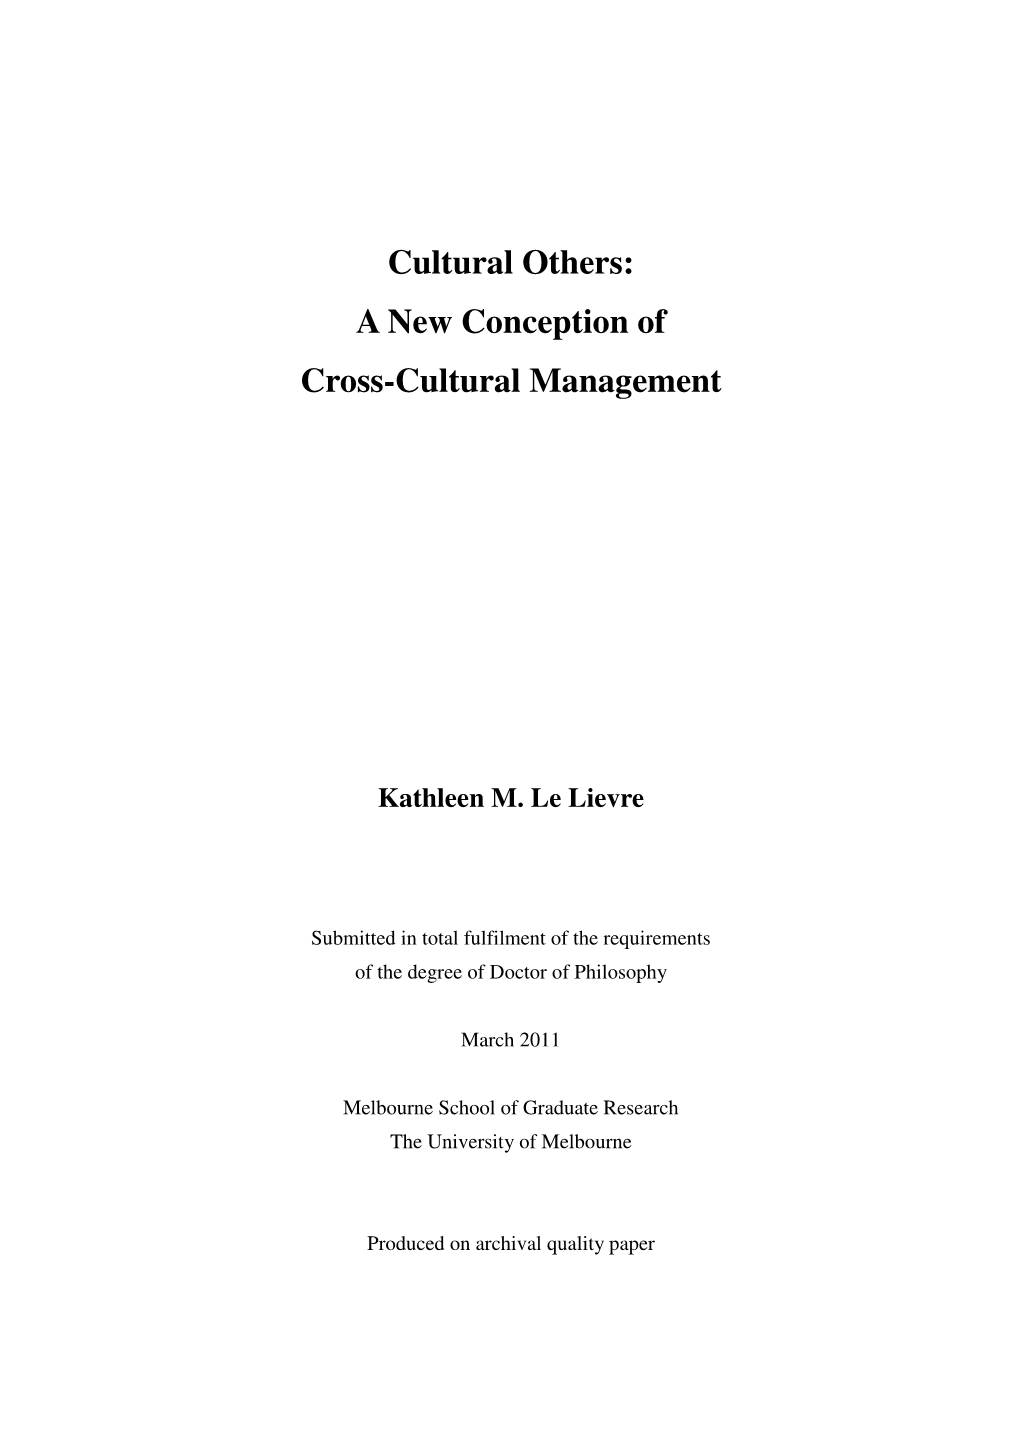 Cultural Others: a New Conception of Cross-Cultural Management